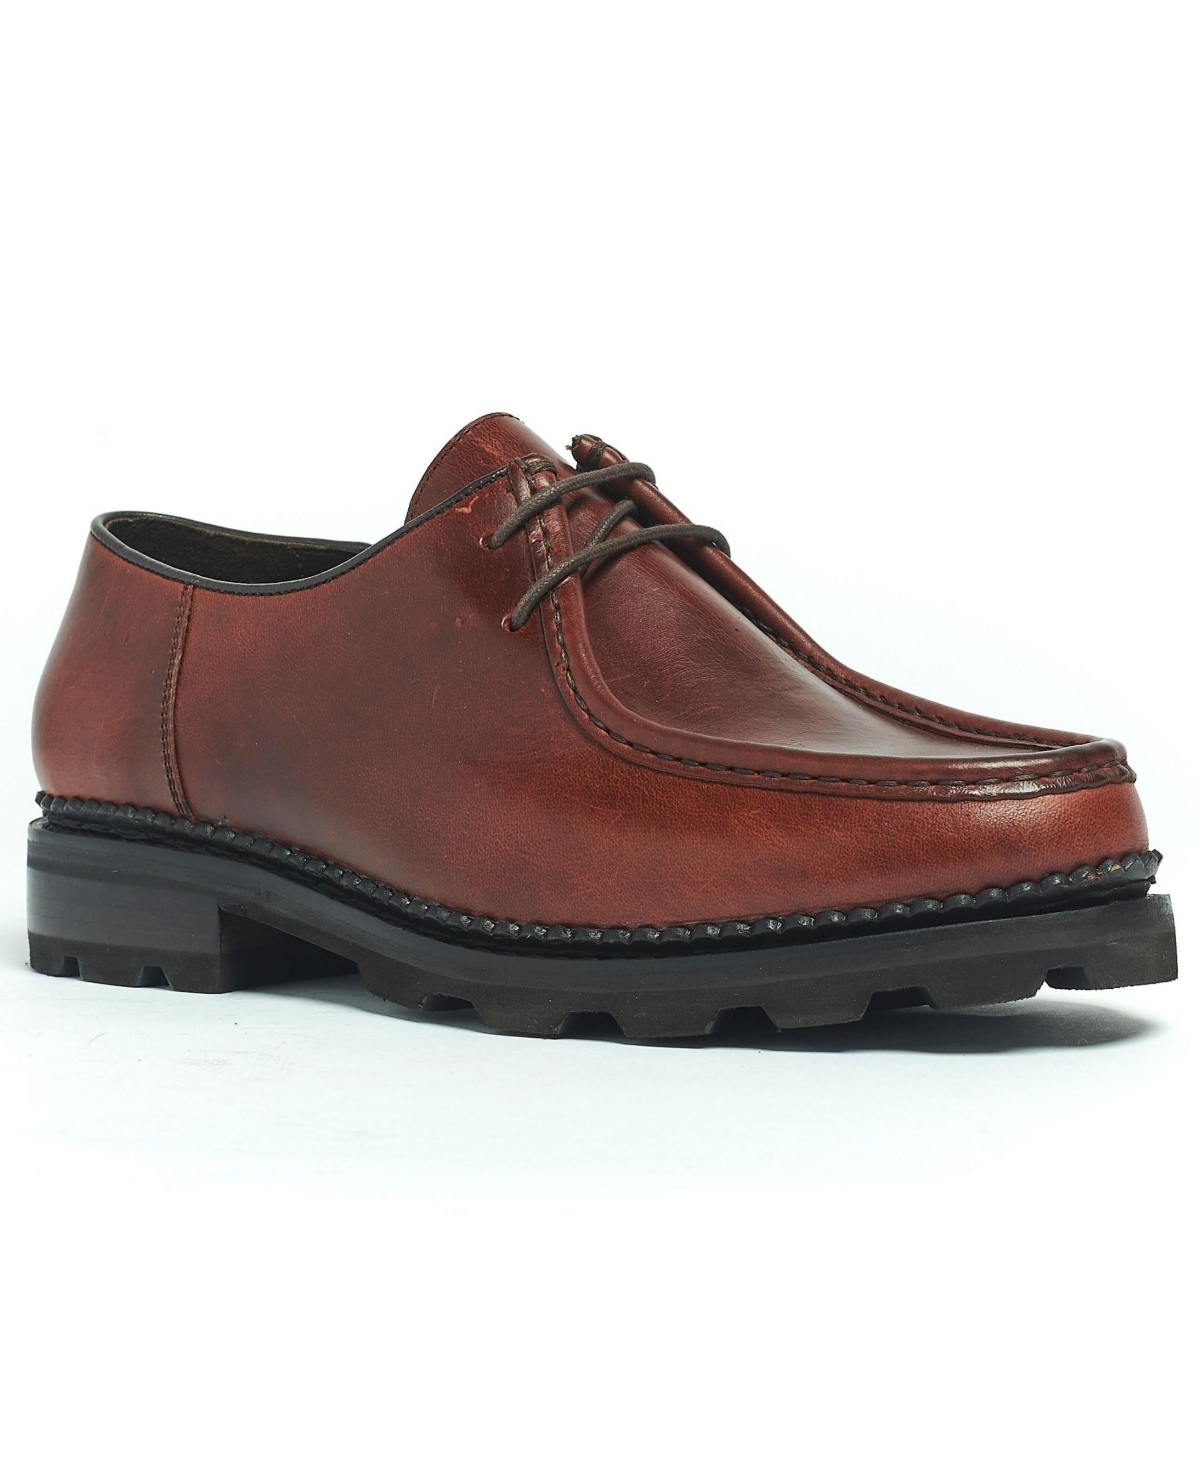 Men's Wright Moc Toe Lace-Up Shoes - Maroon